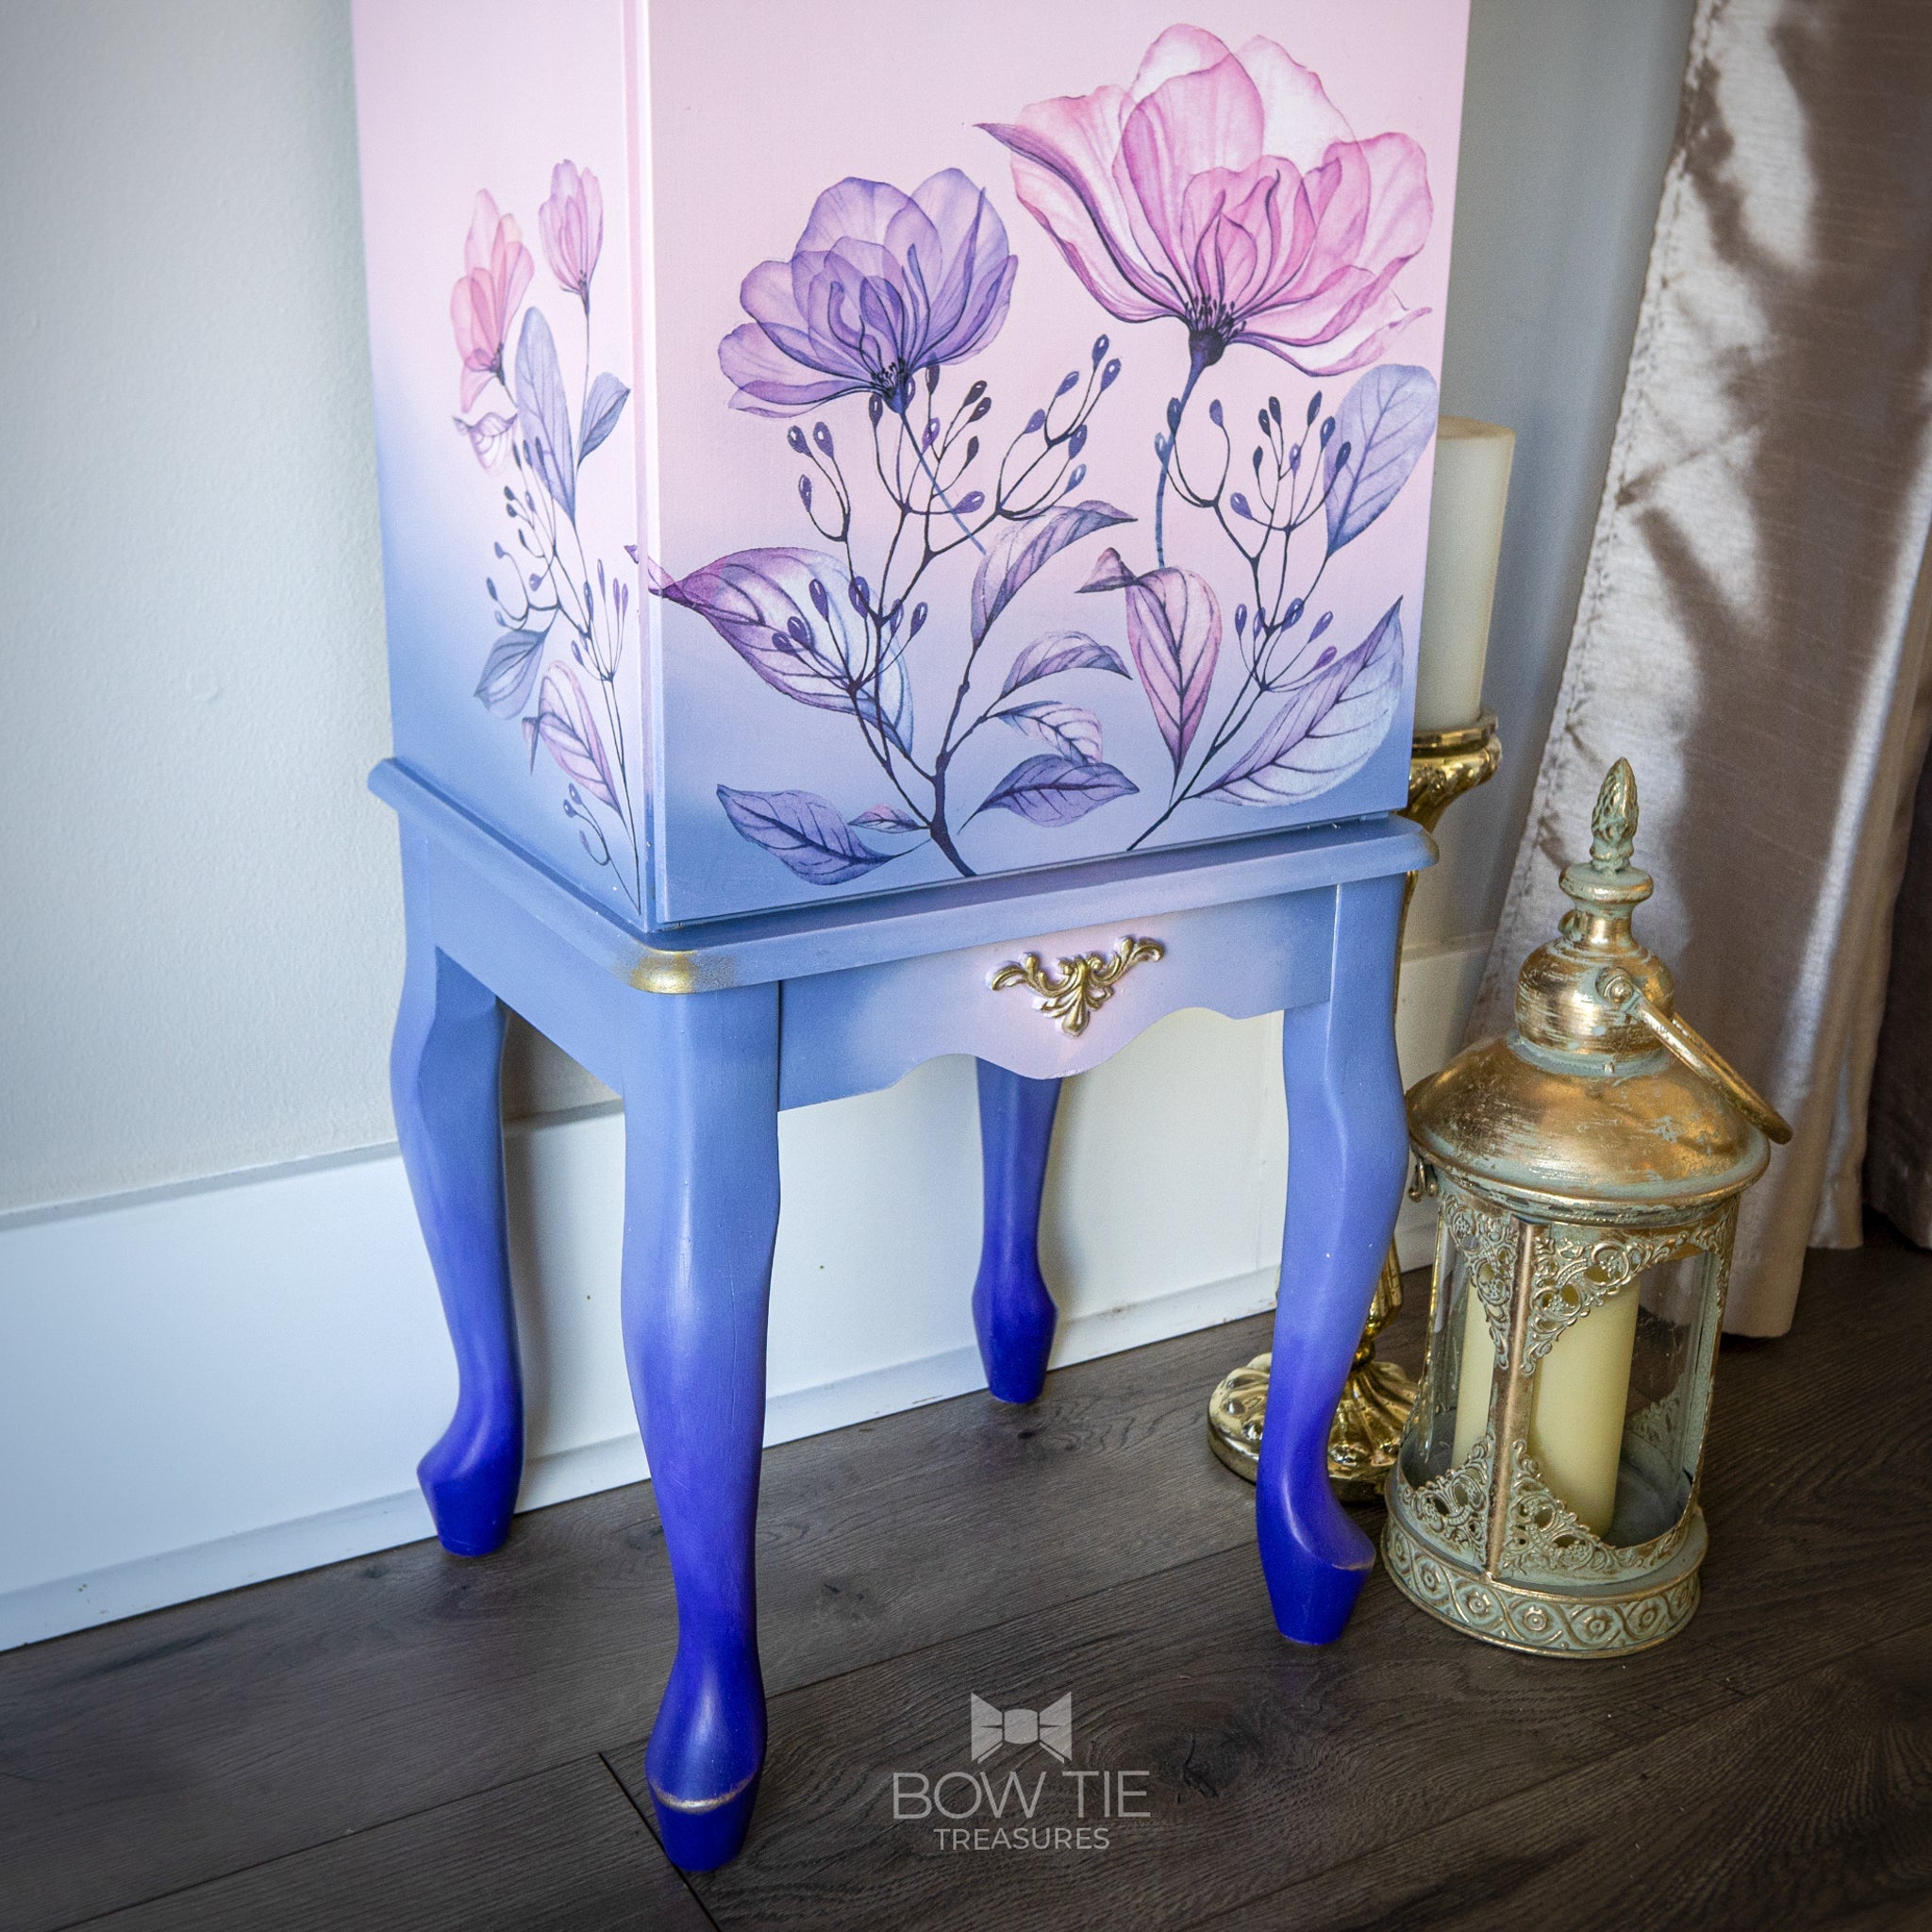 A close-up of a vintage standing jewelry box refurbished by Bow Tie Treasures is painted a blend of light pink and blue and features the Translucent Gardens Transfer on it.